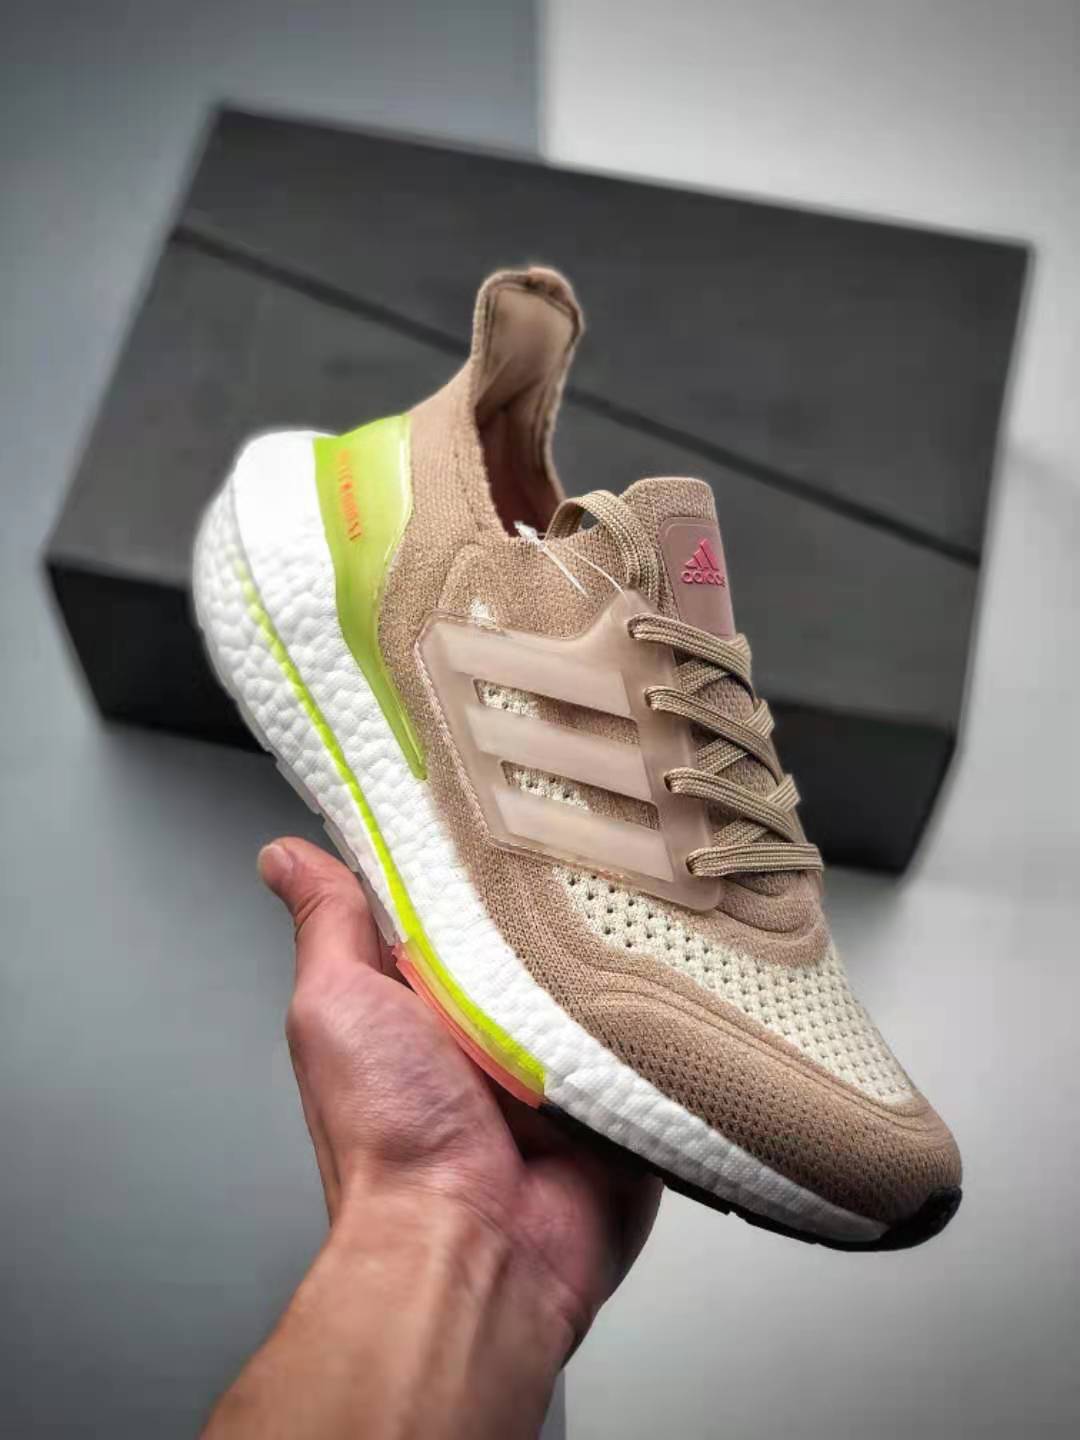 Adidas Ultra Boost 21 Pink Green FY0399 - Stylish and Comfortable Women's Sneakers